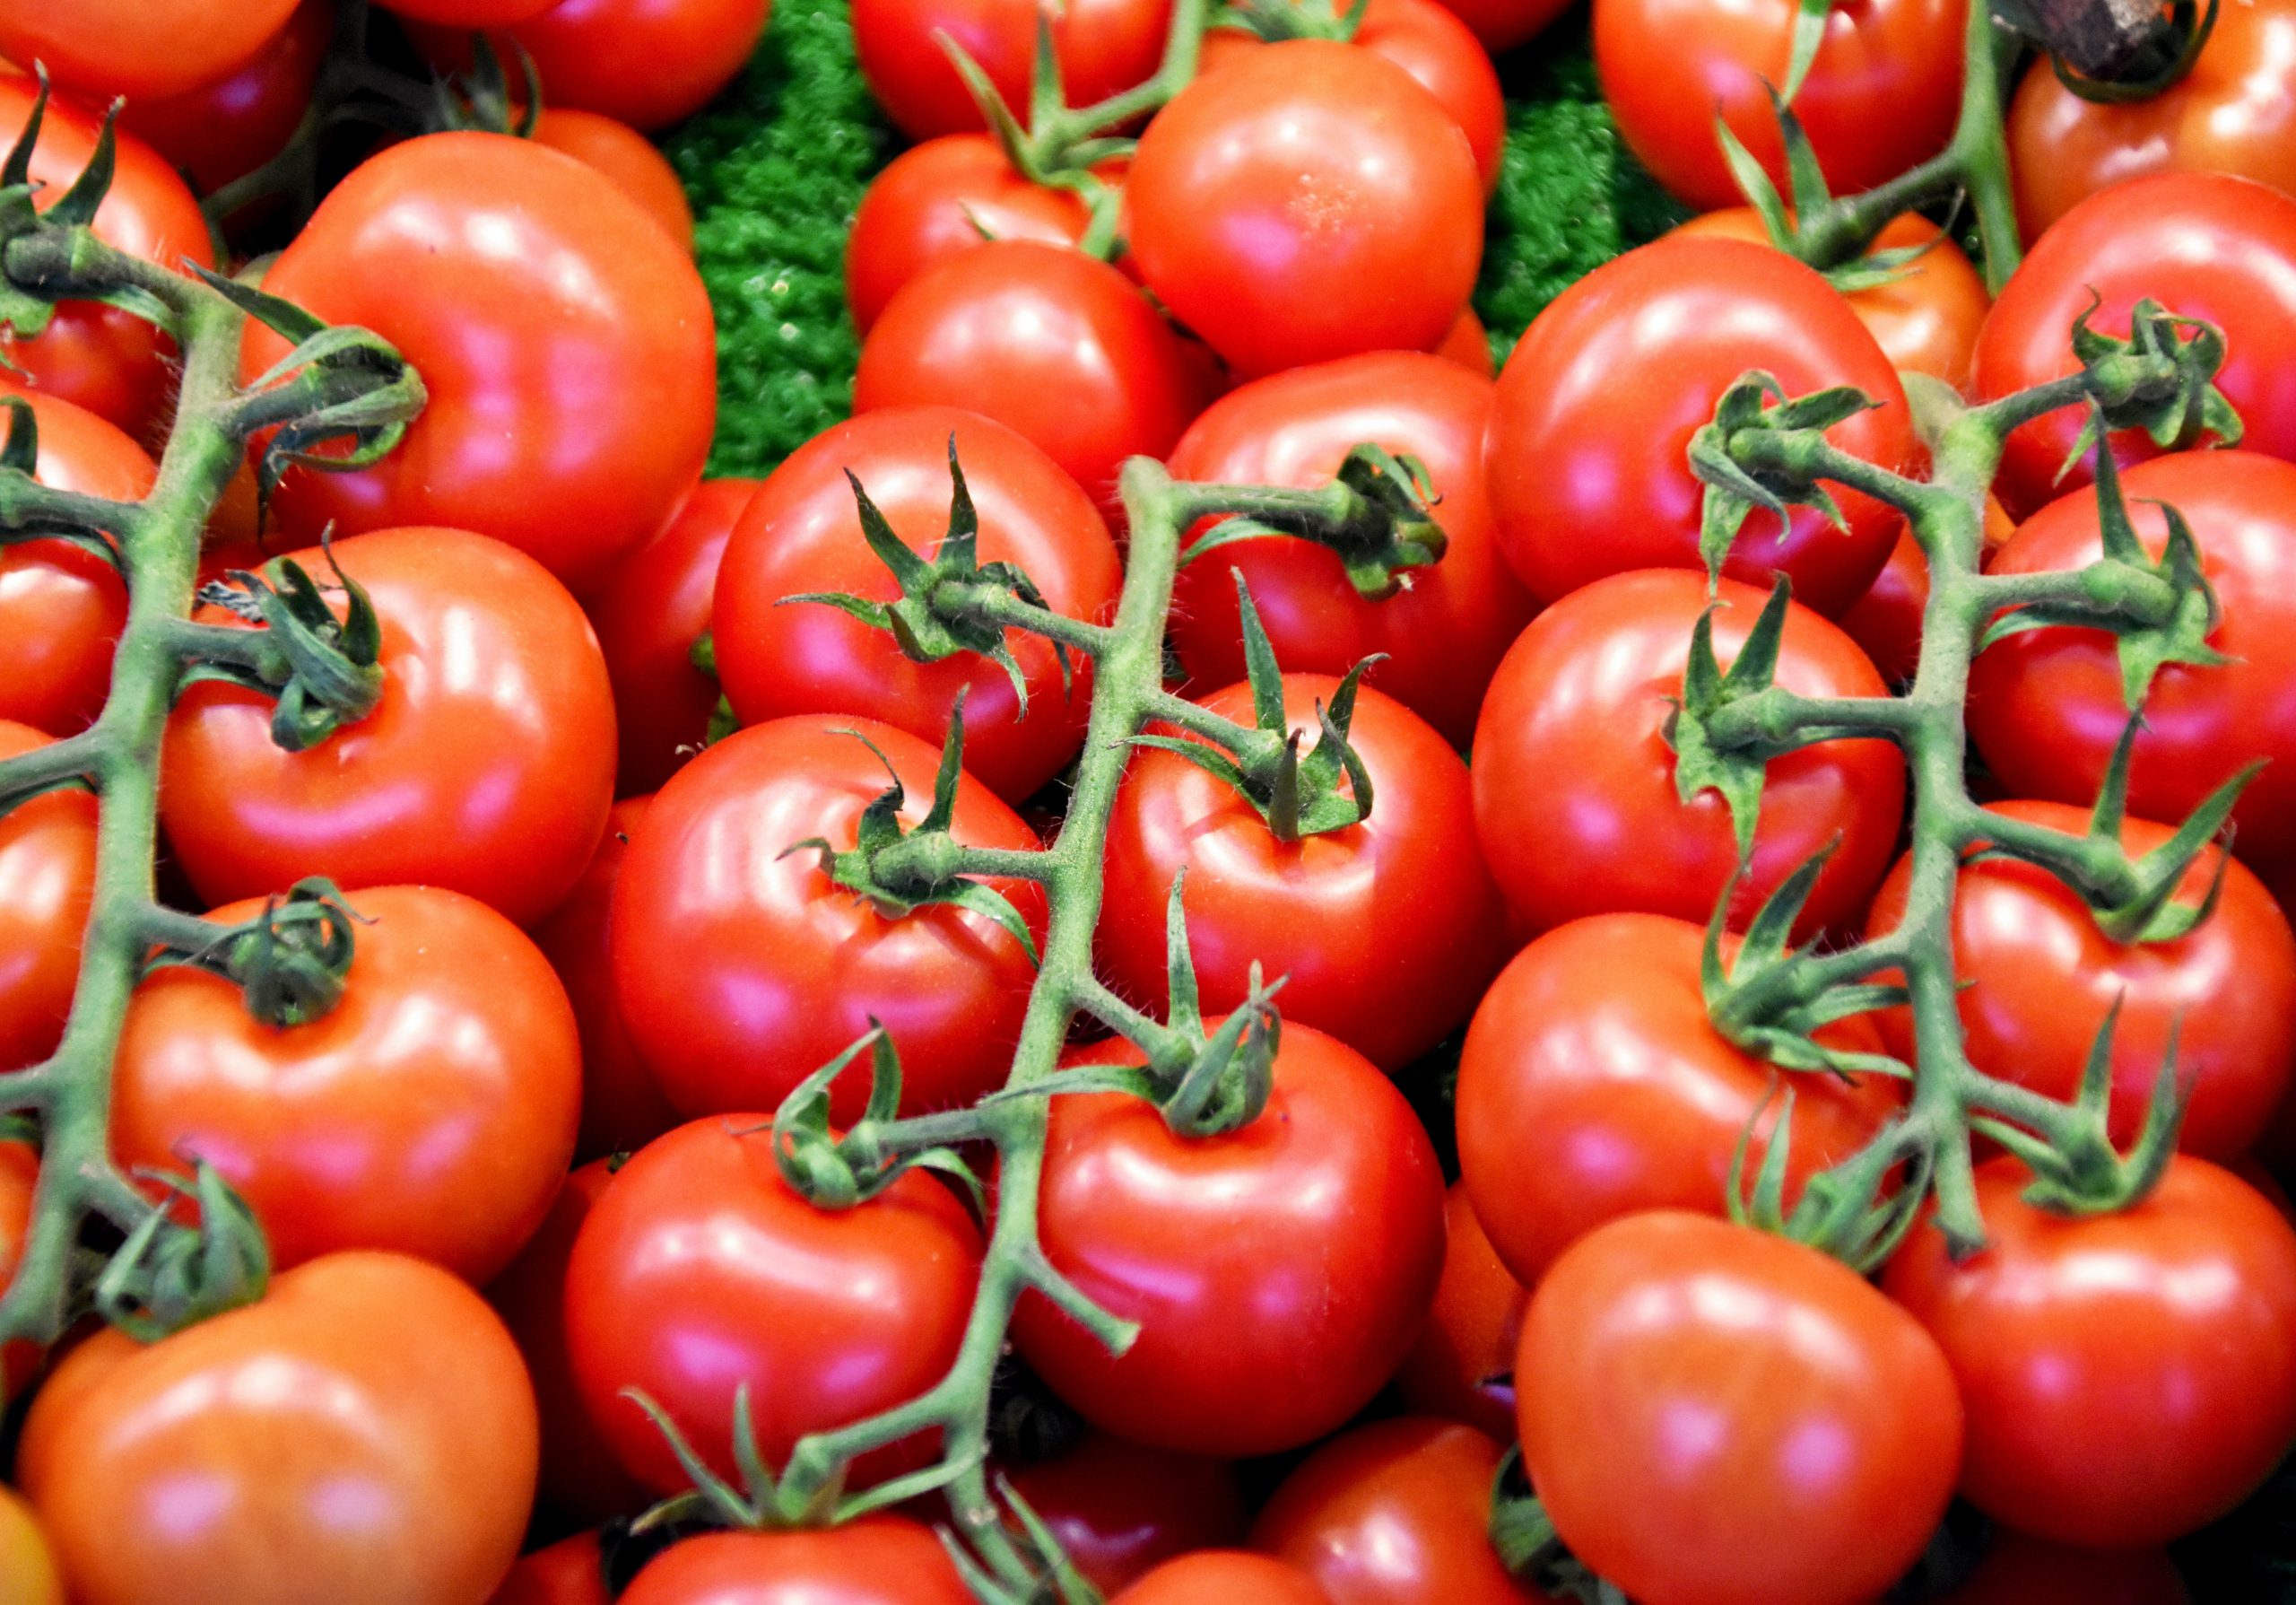 For a heat wave, tomatoes are the perfect food to eat without cooking.